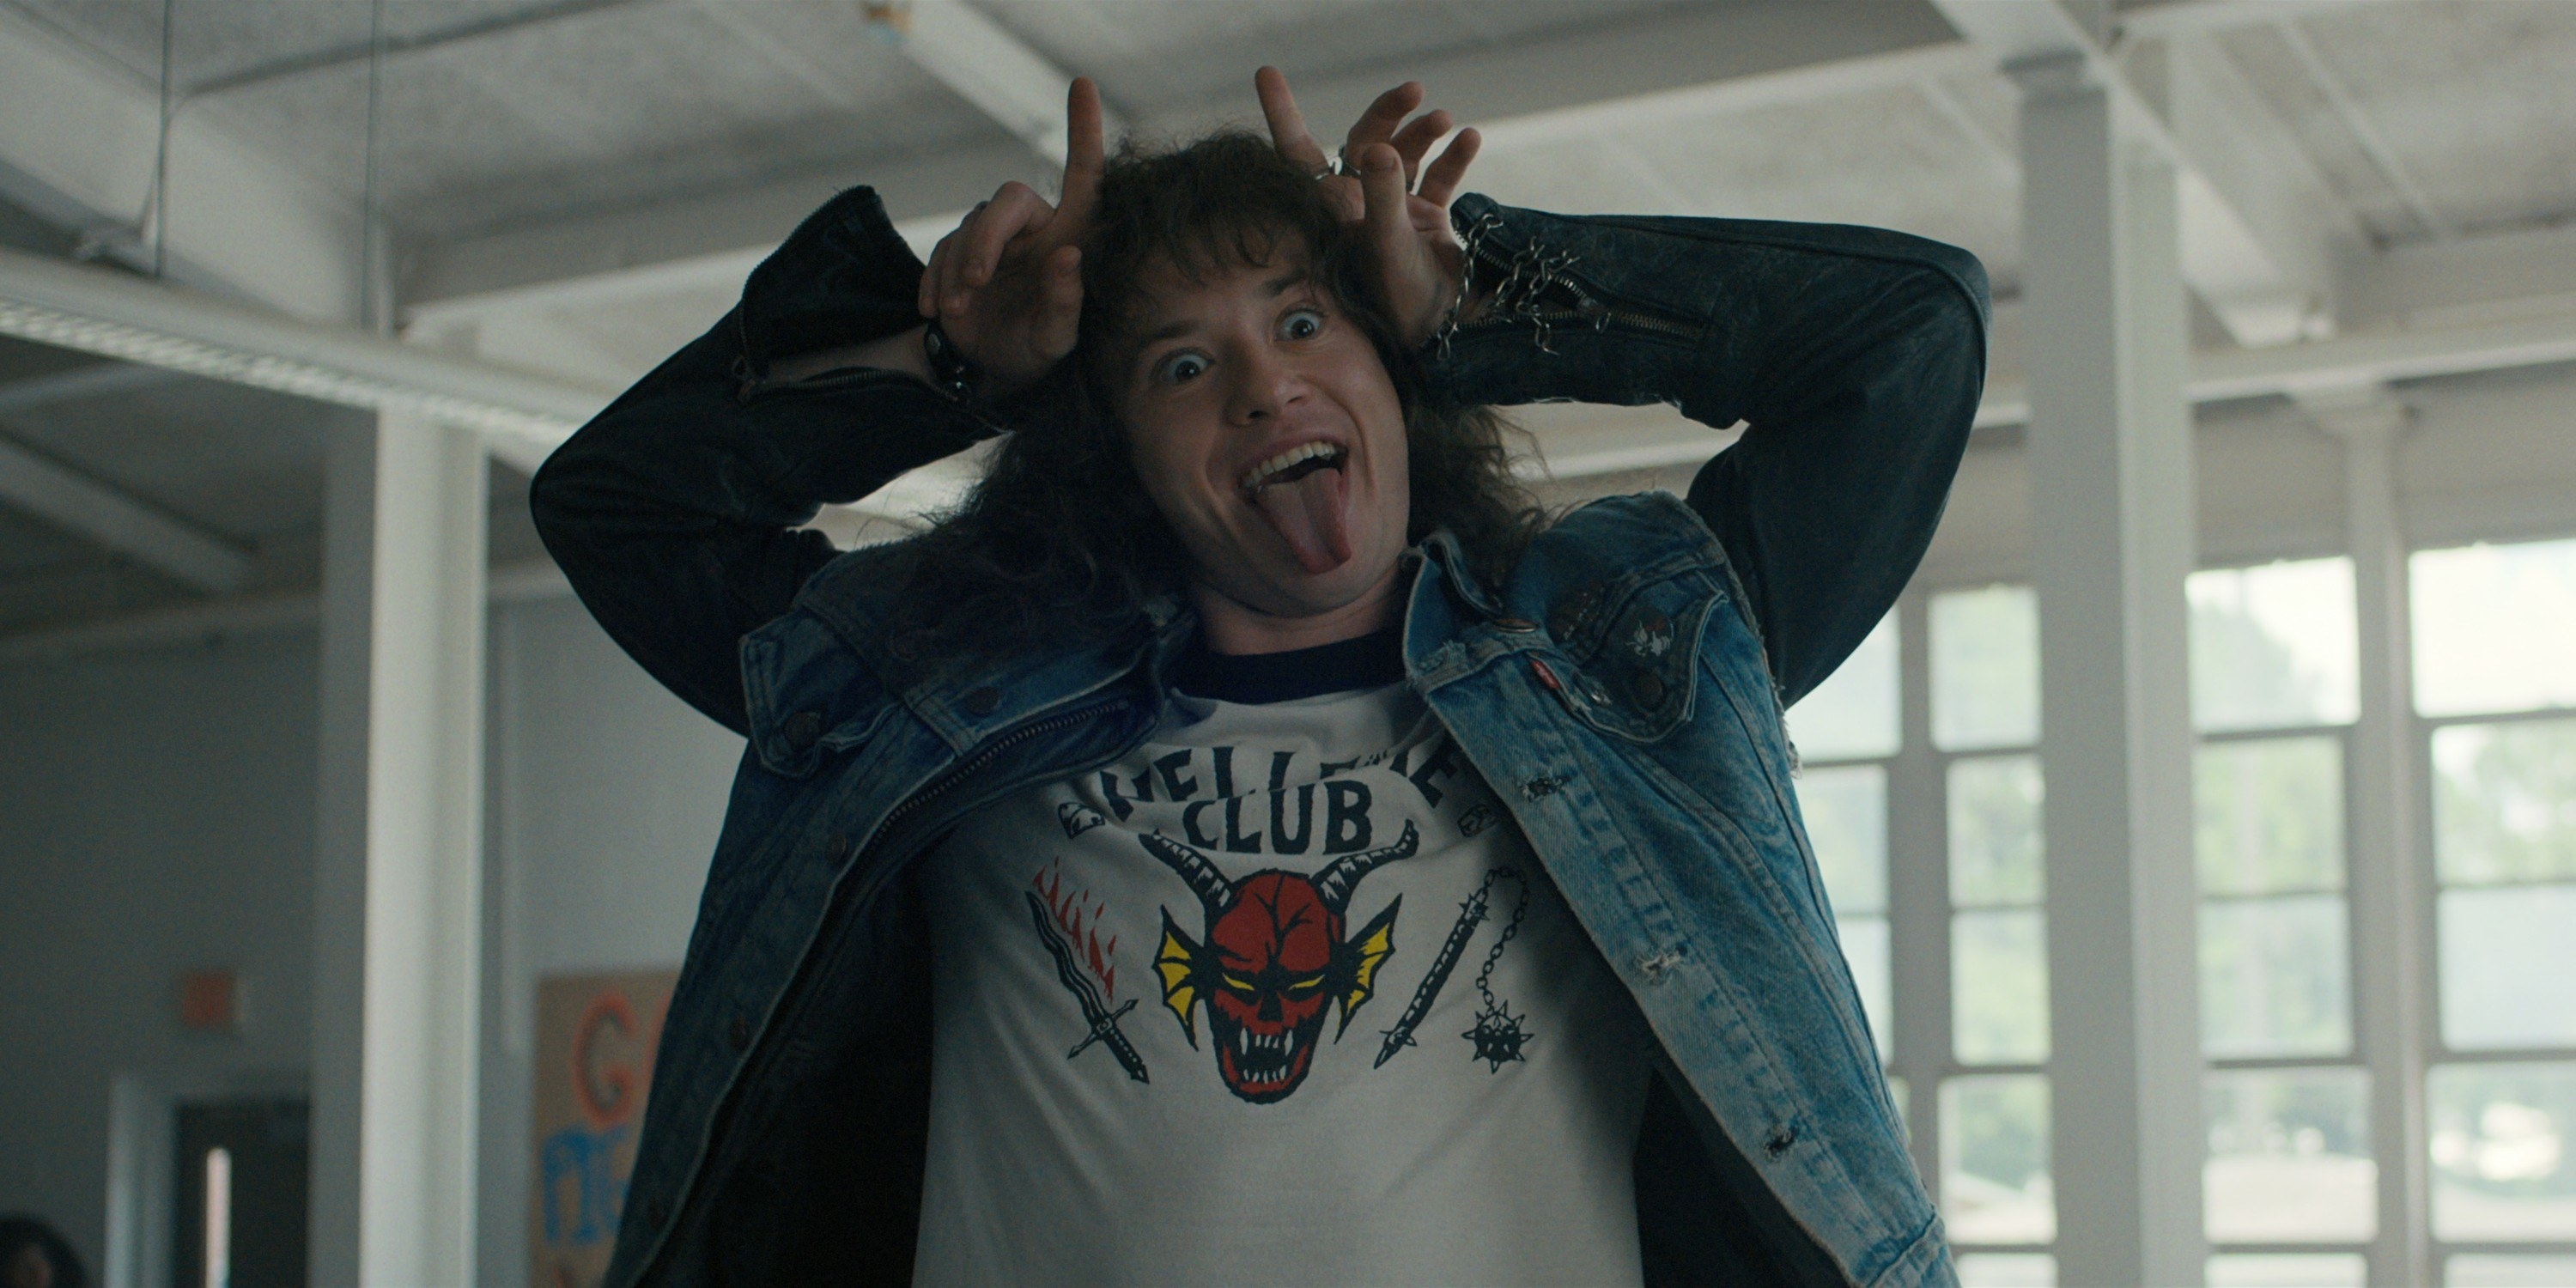 Eddie Munson wears a Hellfire Club T-shirt under a denim vest while making devil horns with his fingers and his tongue sticking out